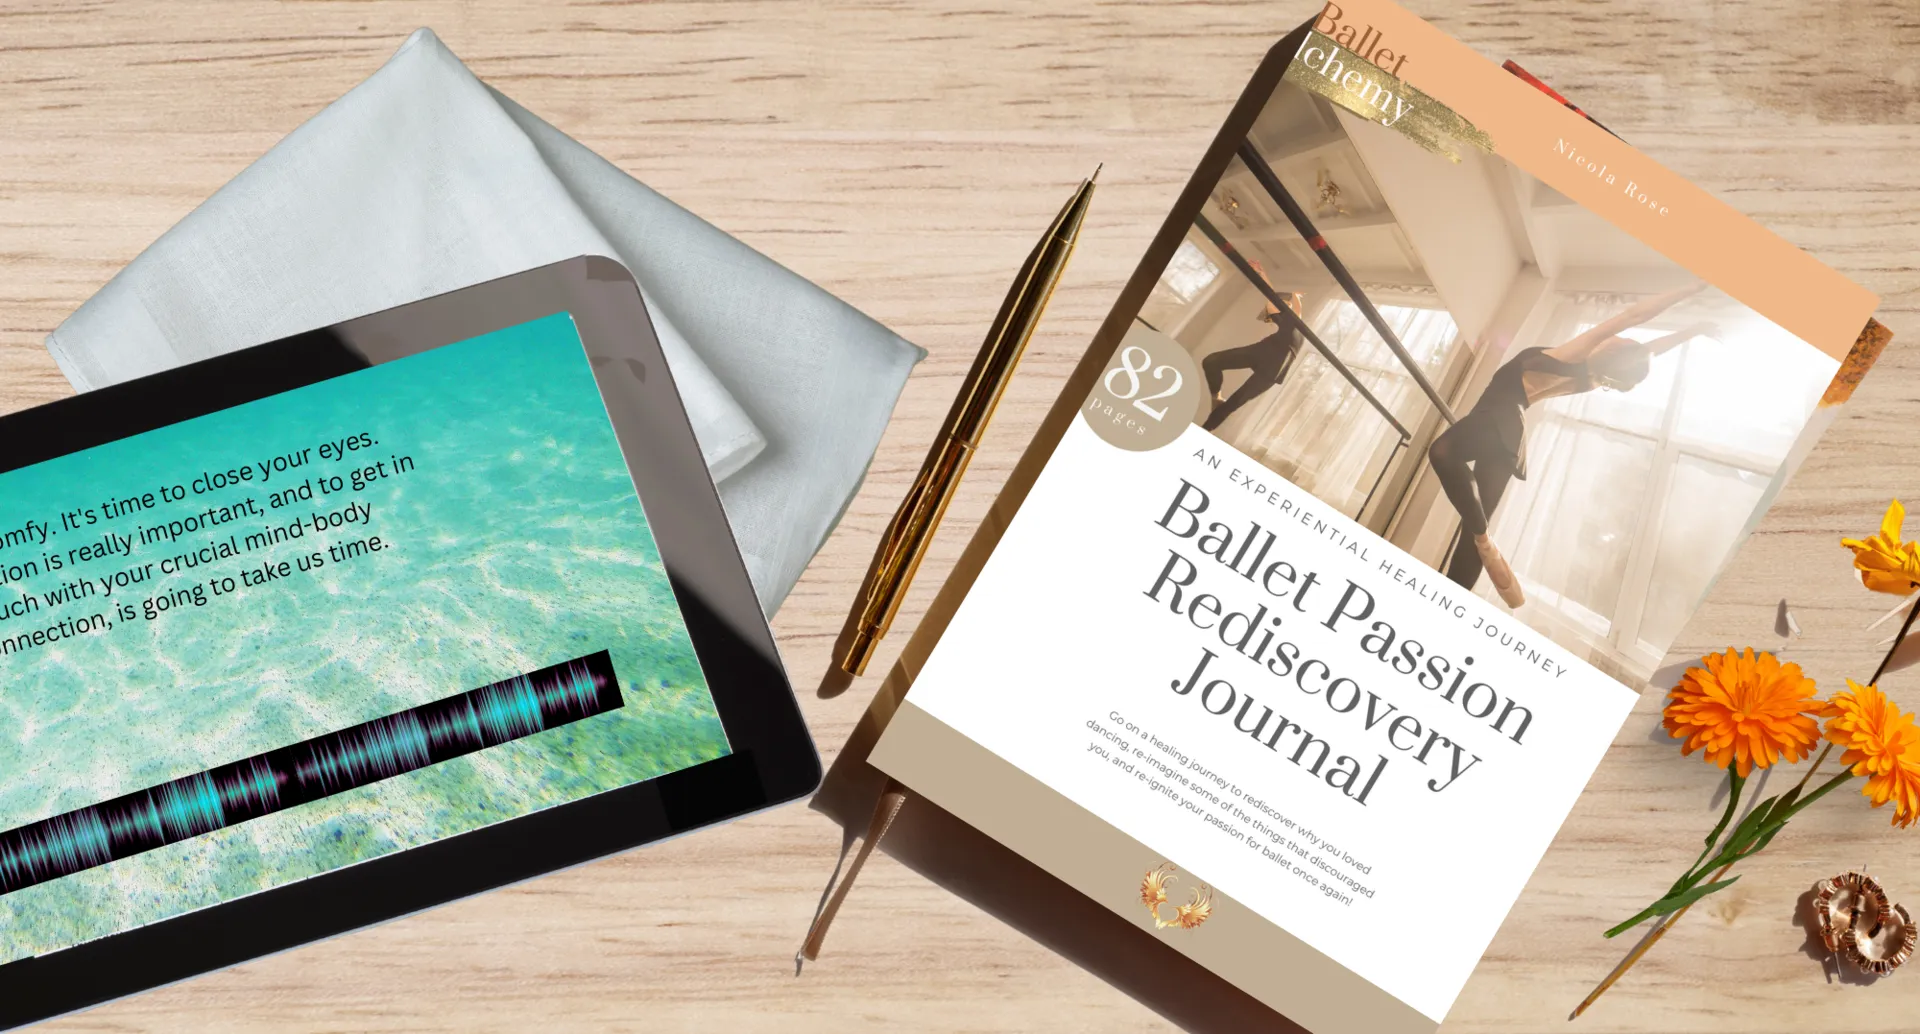 Ballet Passion Rediscovery - COURSE + JOURNAL